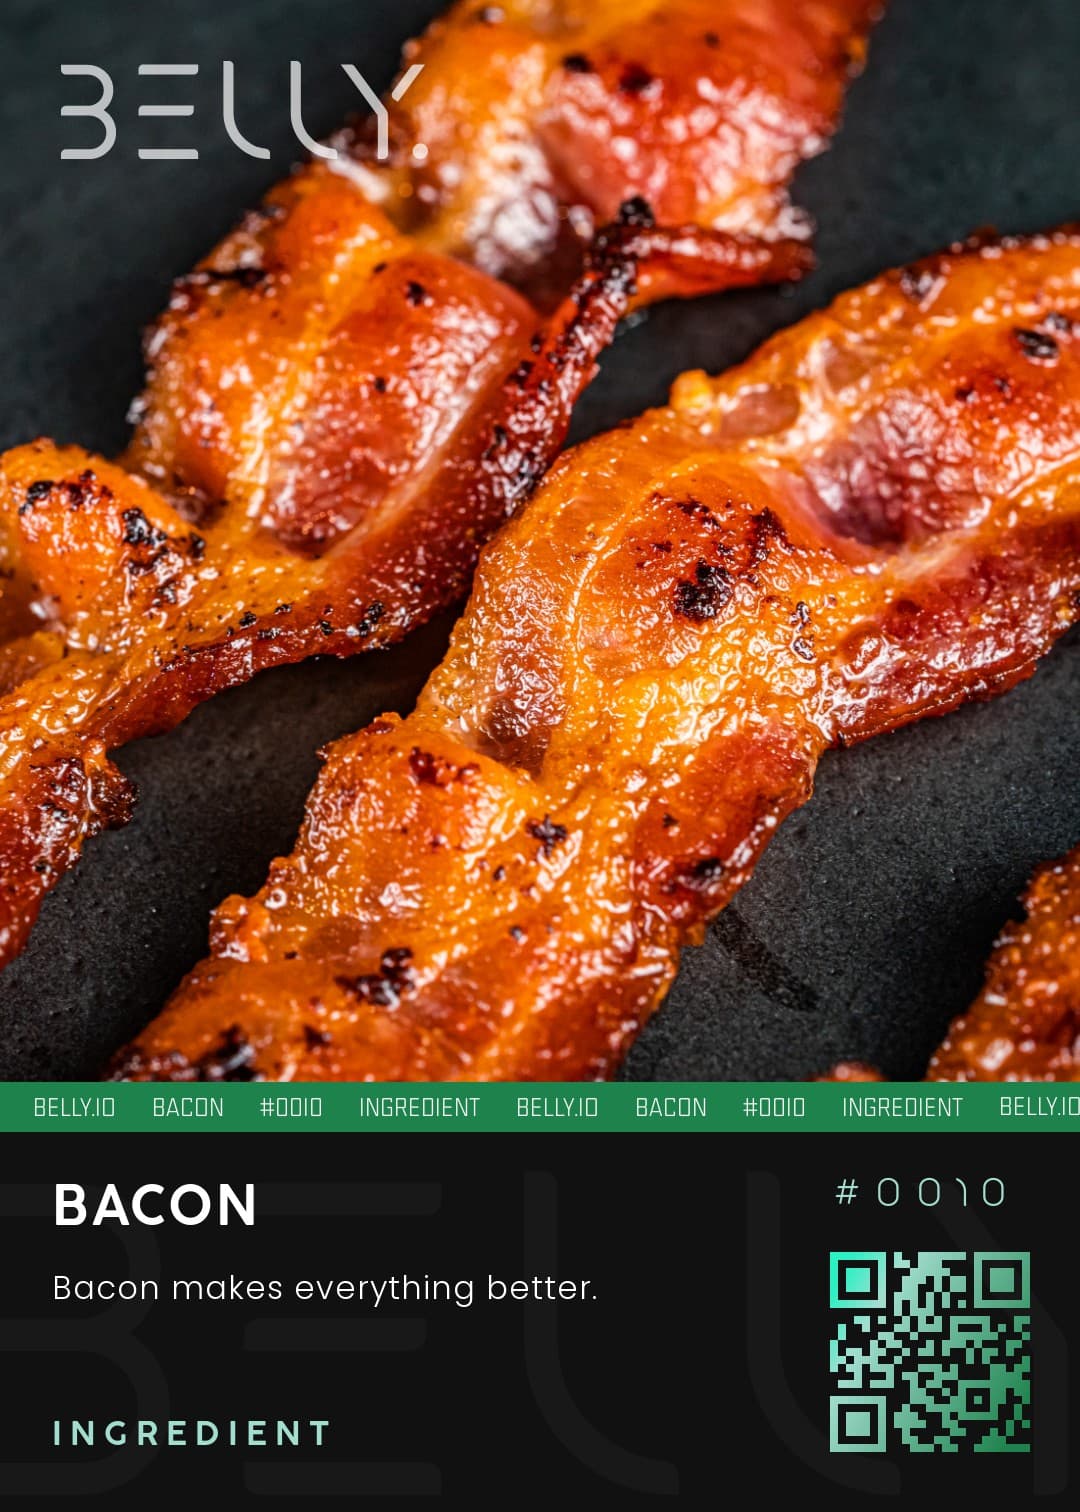 Bacon - Bacon makes everything better.